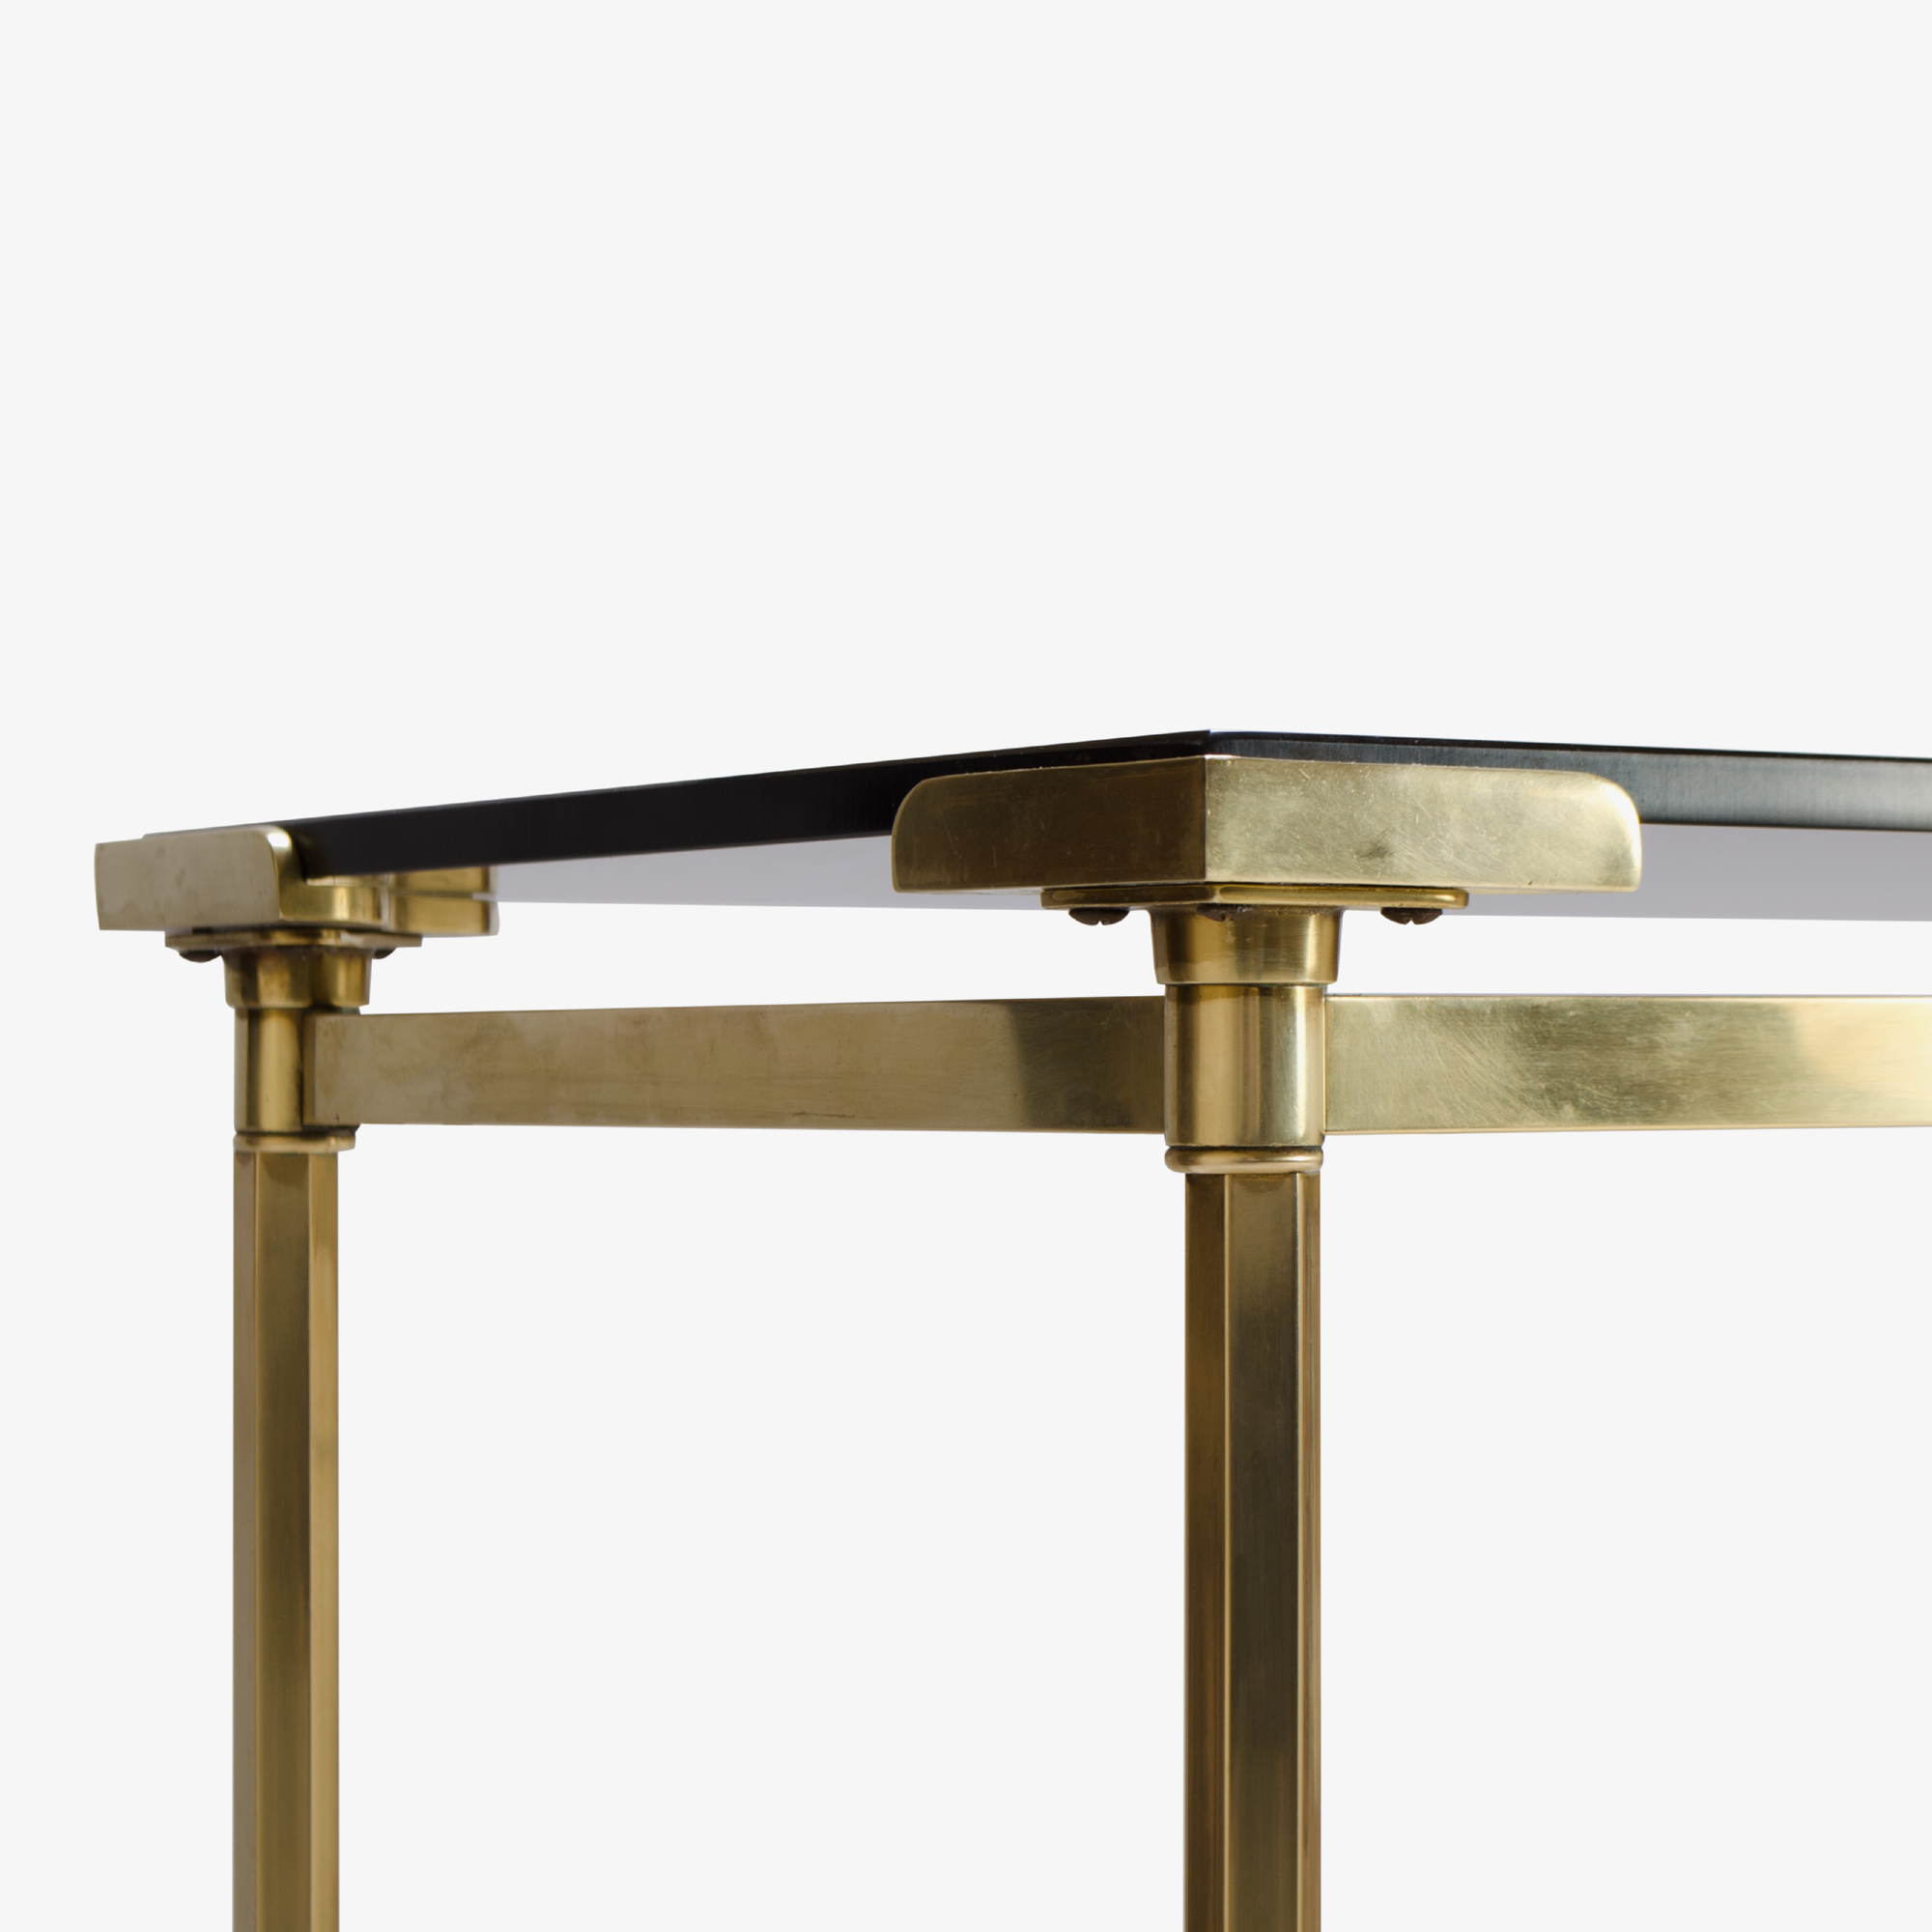 French Brass Console with Floating Smoked Glass